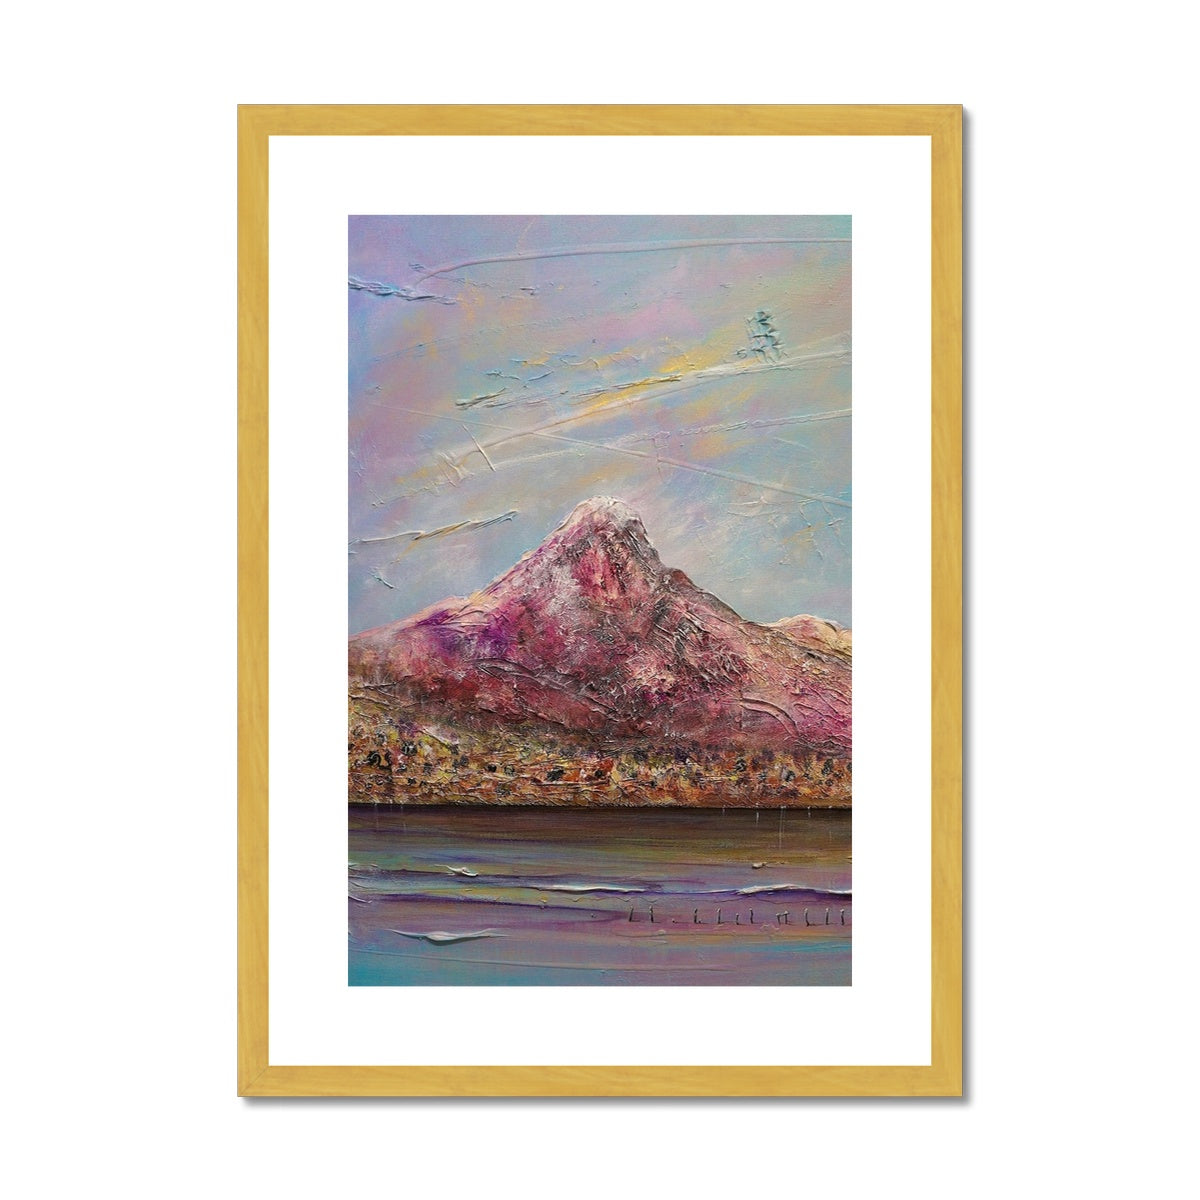 Ben Lomond Painting | Antique Framed & Mounted Prints From Scotland-Antique Framed & Mounted Prints-Scottish Lochs & Mountains Art Gallery-A2 Portrait-Gold Frame-Paintings, Prints, Homeware, Art Gifts From Scotland By Scottish Artist Kevin Hunter